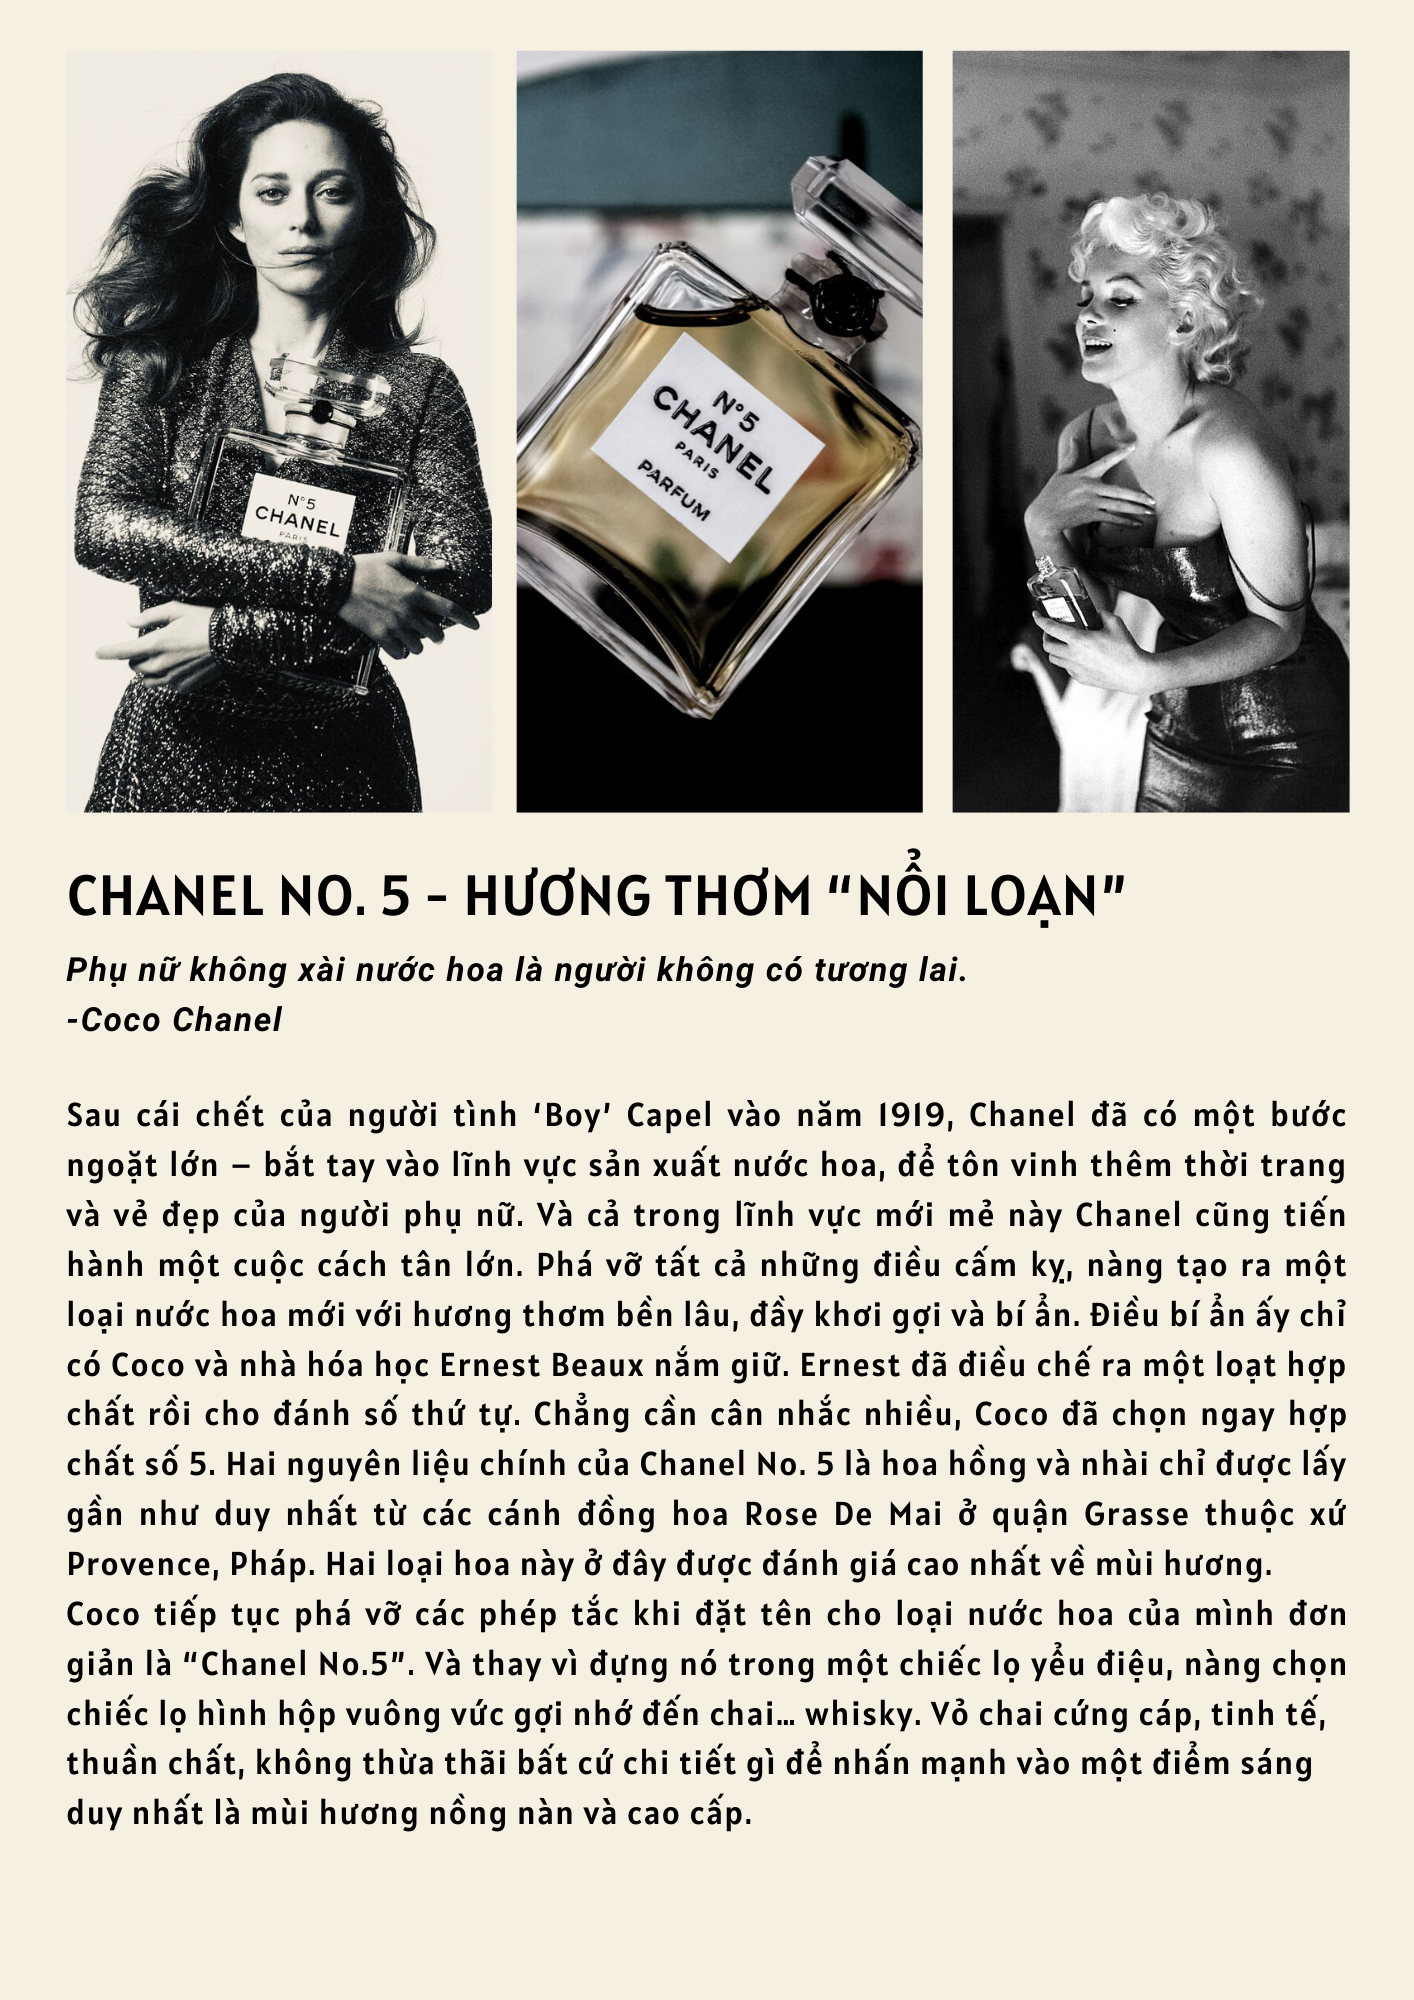 1/coco-chanel-nguoi-dinh-hinh-lai-thoi-trang-the-gioi-6_04072020110332867_5wipyhdp.rjd.png